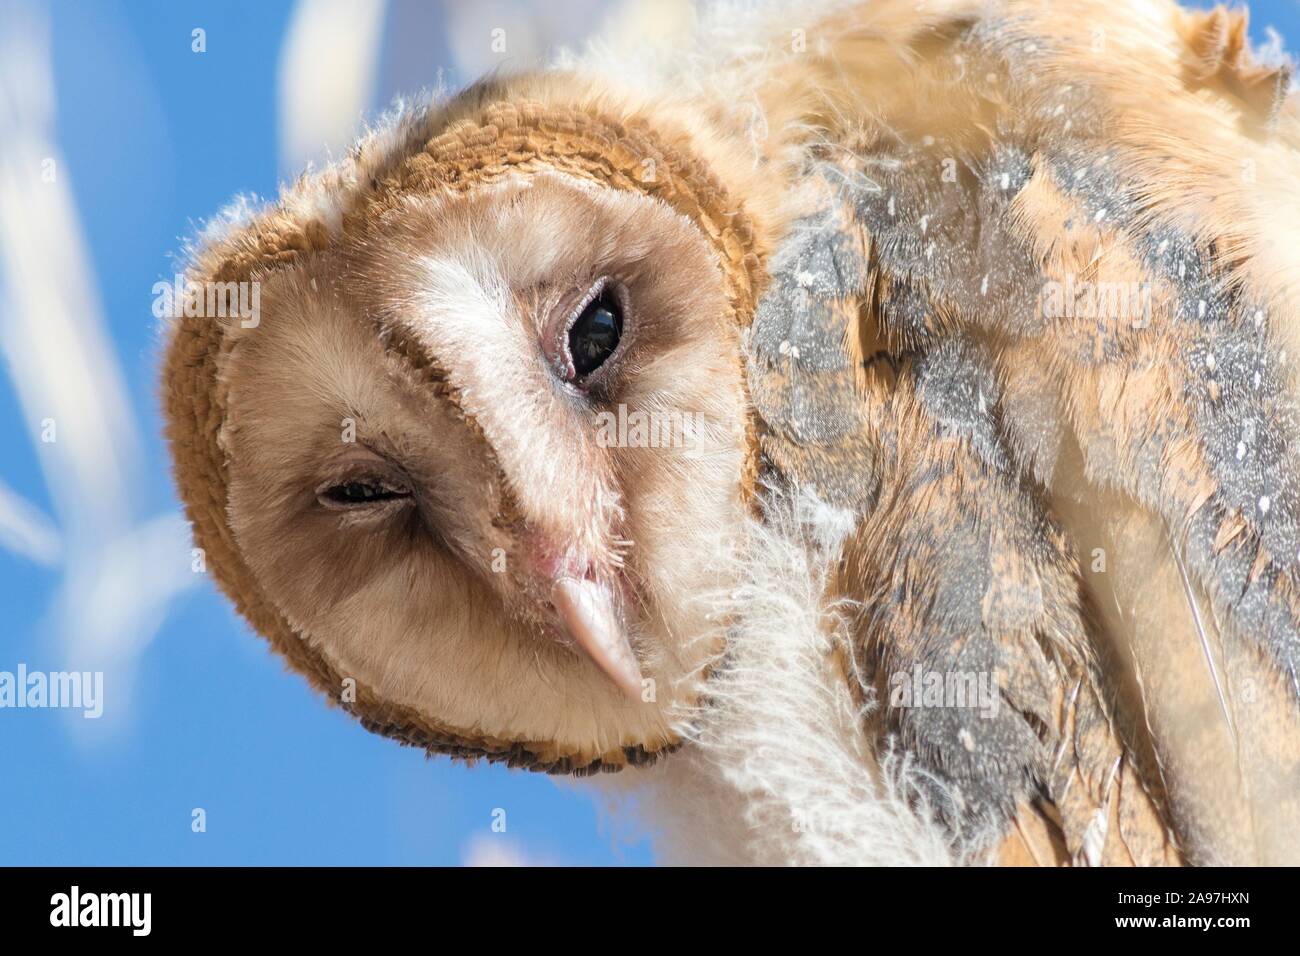 An American Barn Owl resting in a palm tree at the Oasis of Mara in the Joshua Tree National Park, Twentynine Palms, California. Stock Photo